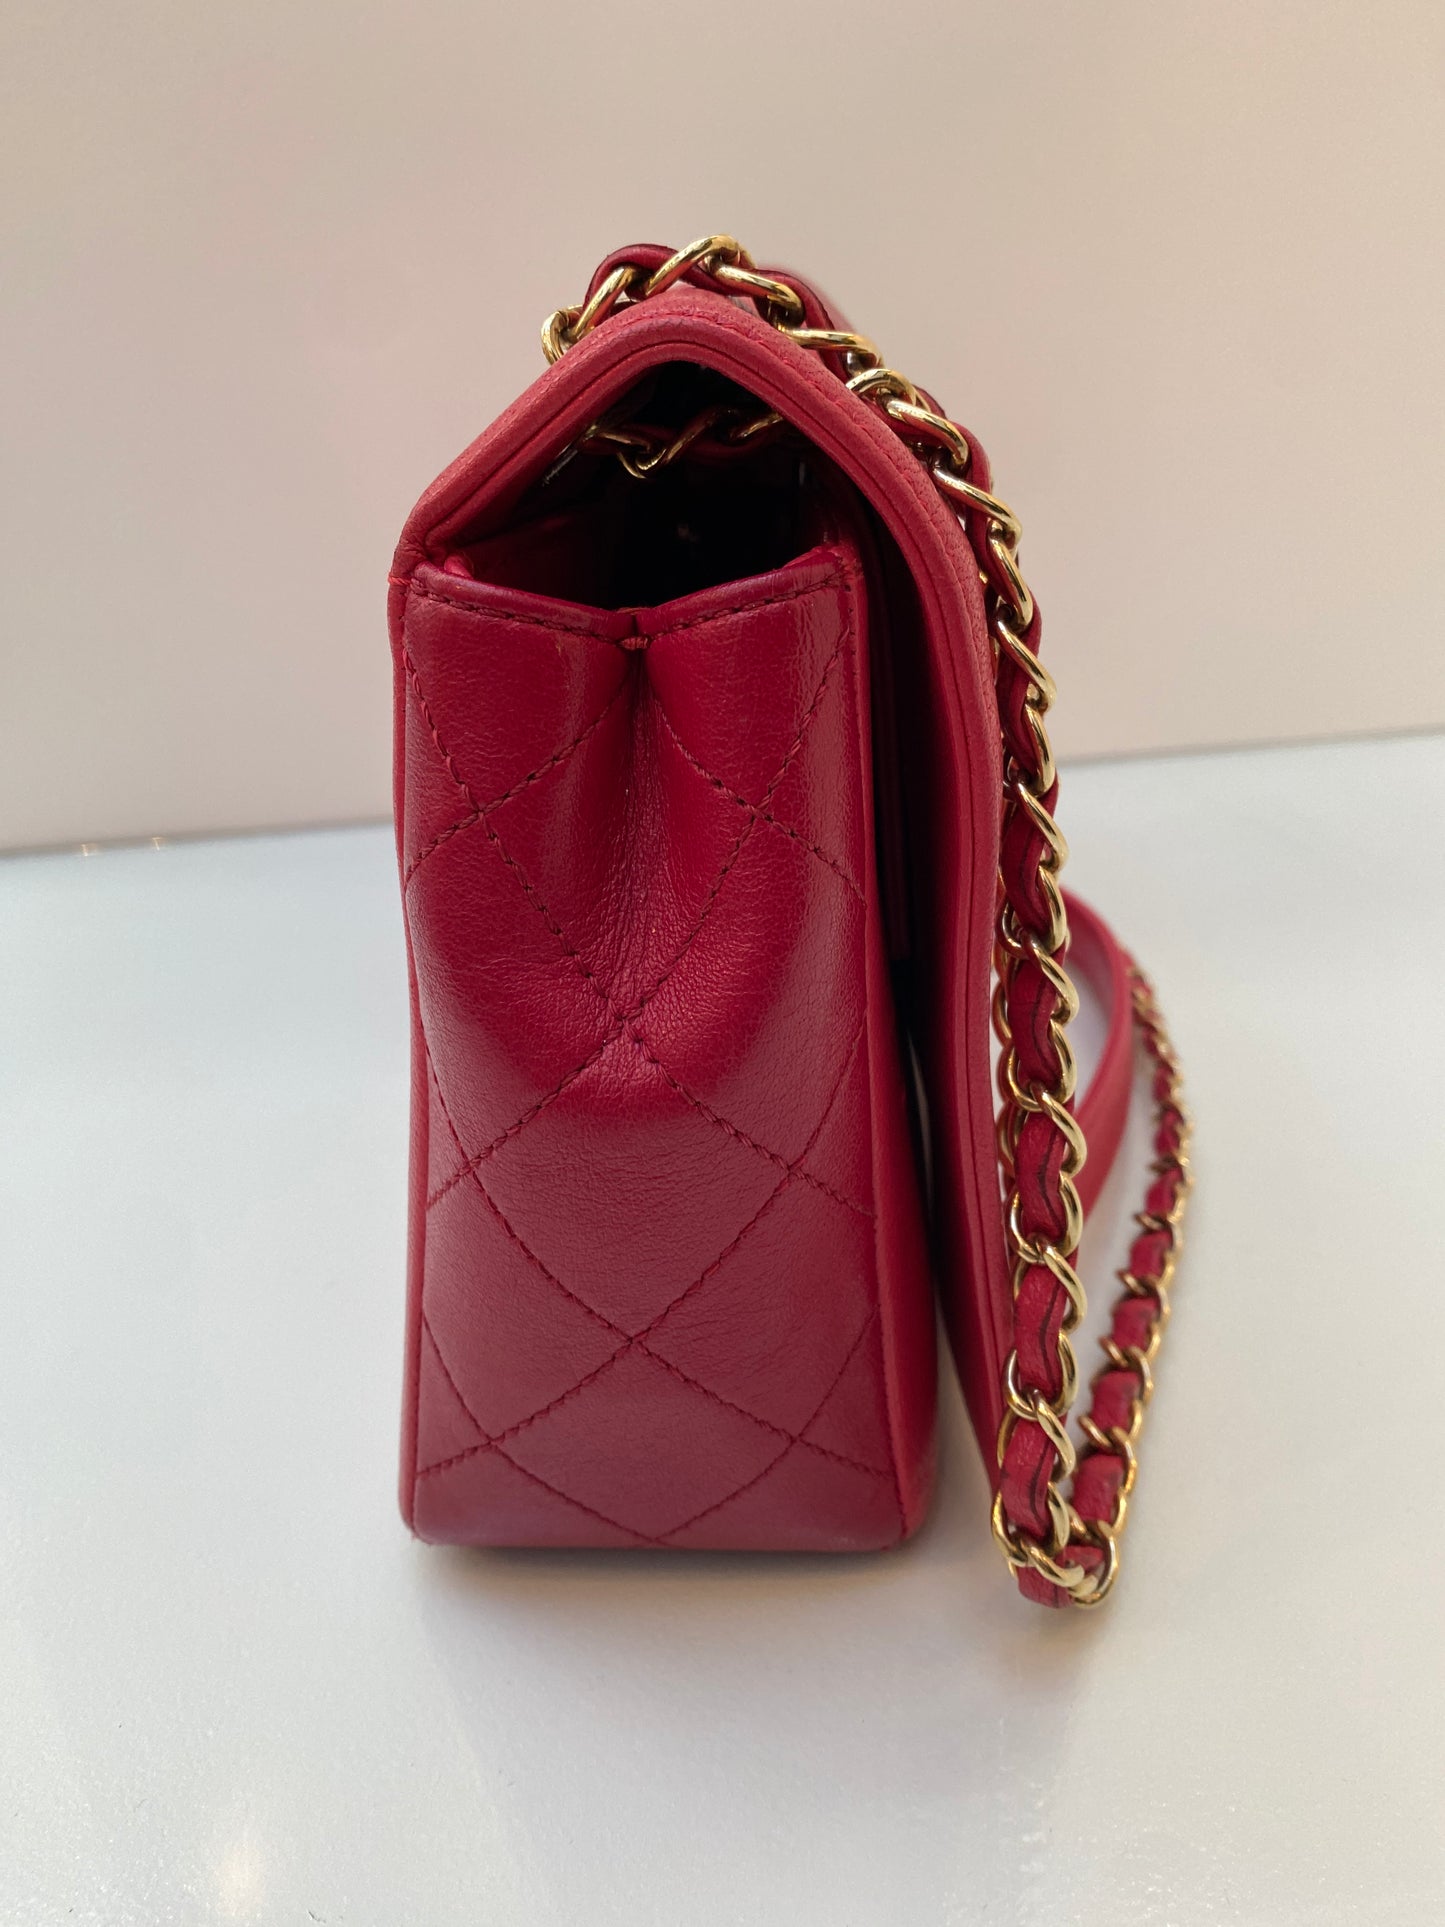 Chanel Hot Pink Lambskin Leather Mademoiselle Flap Bag GHW